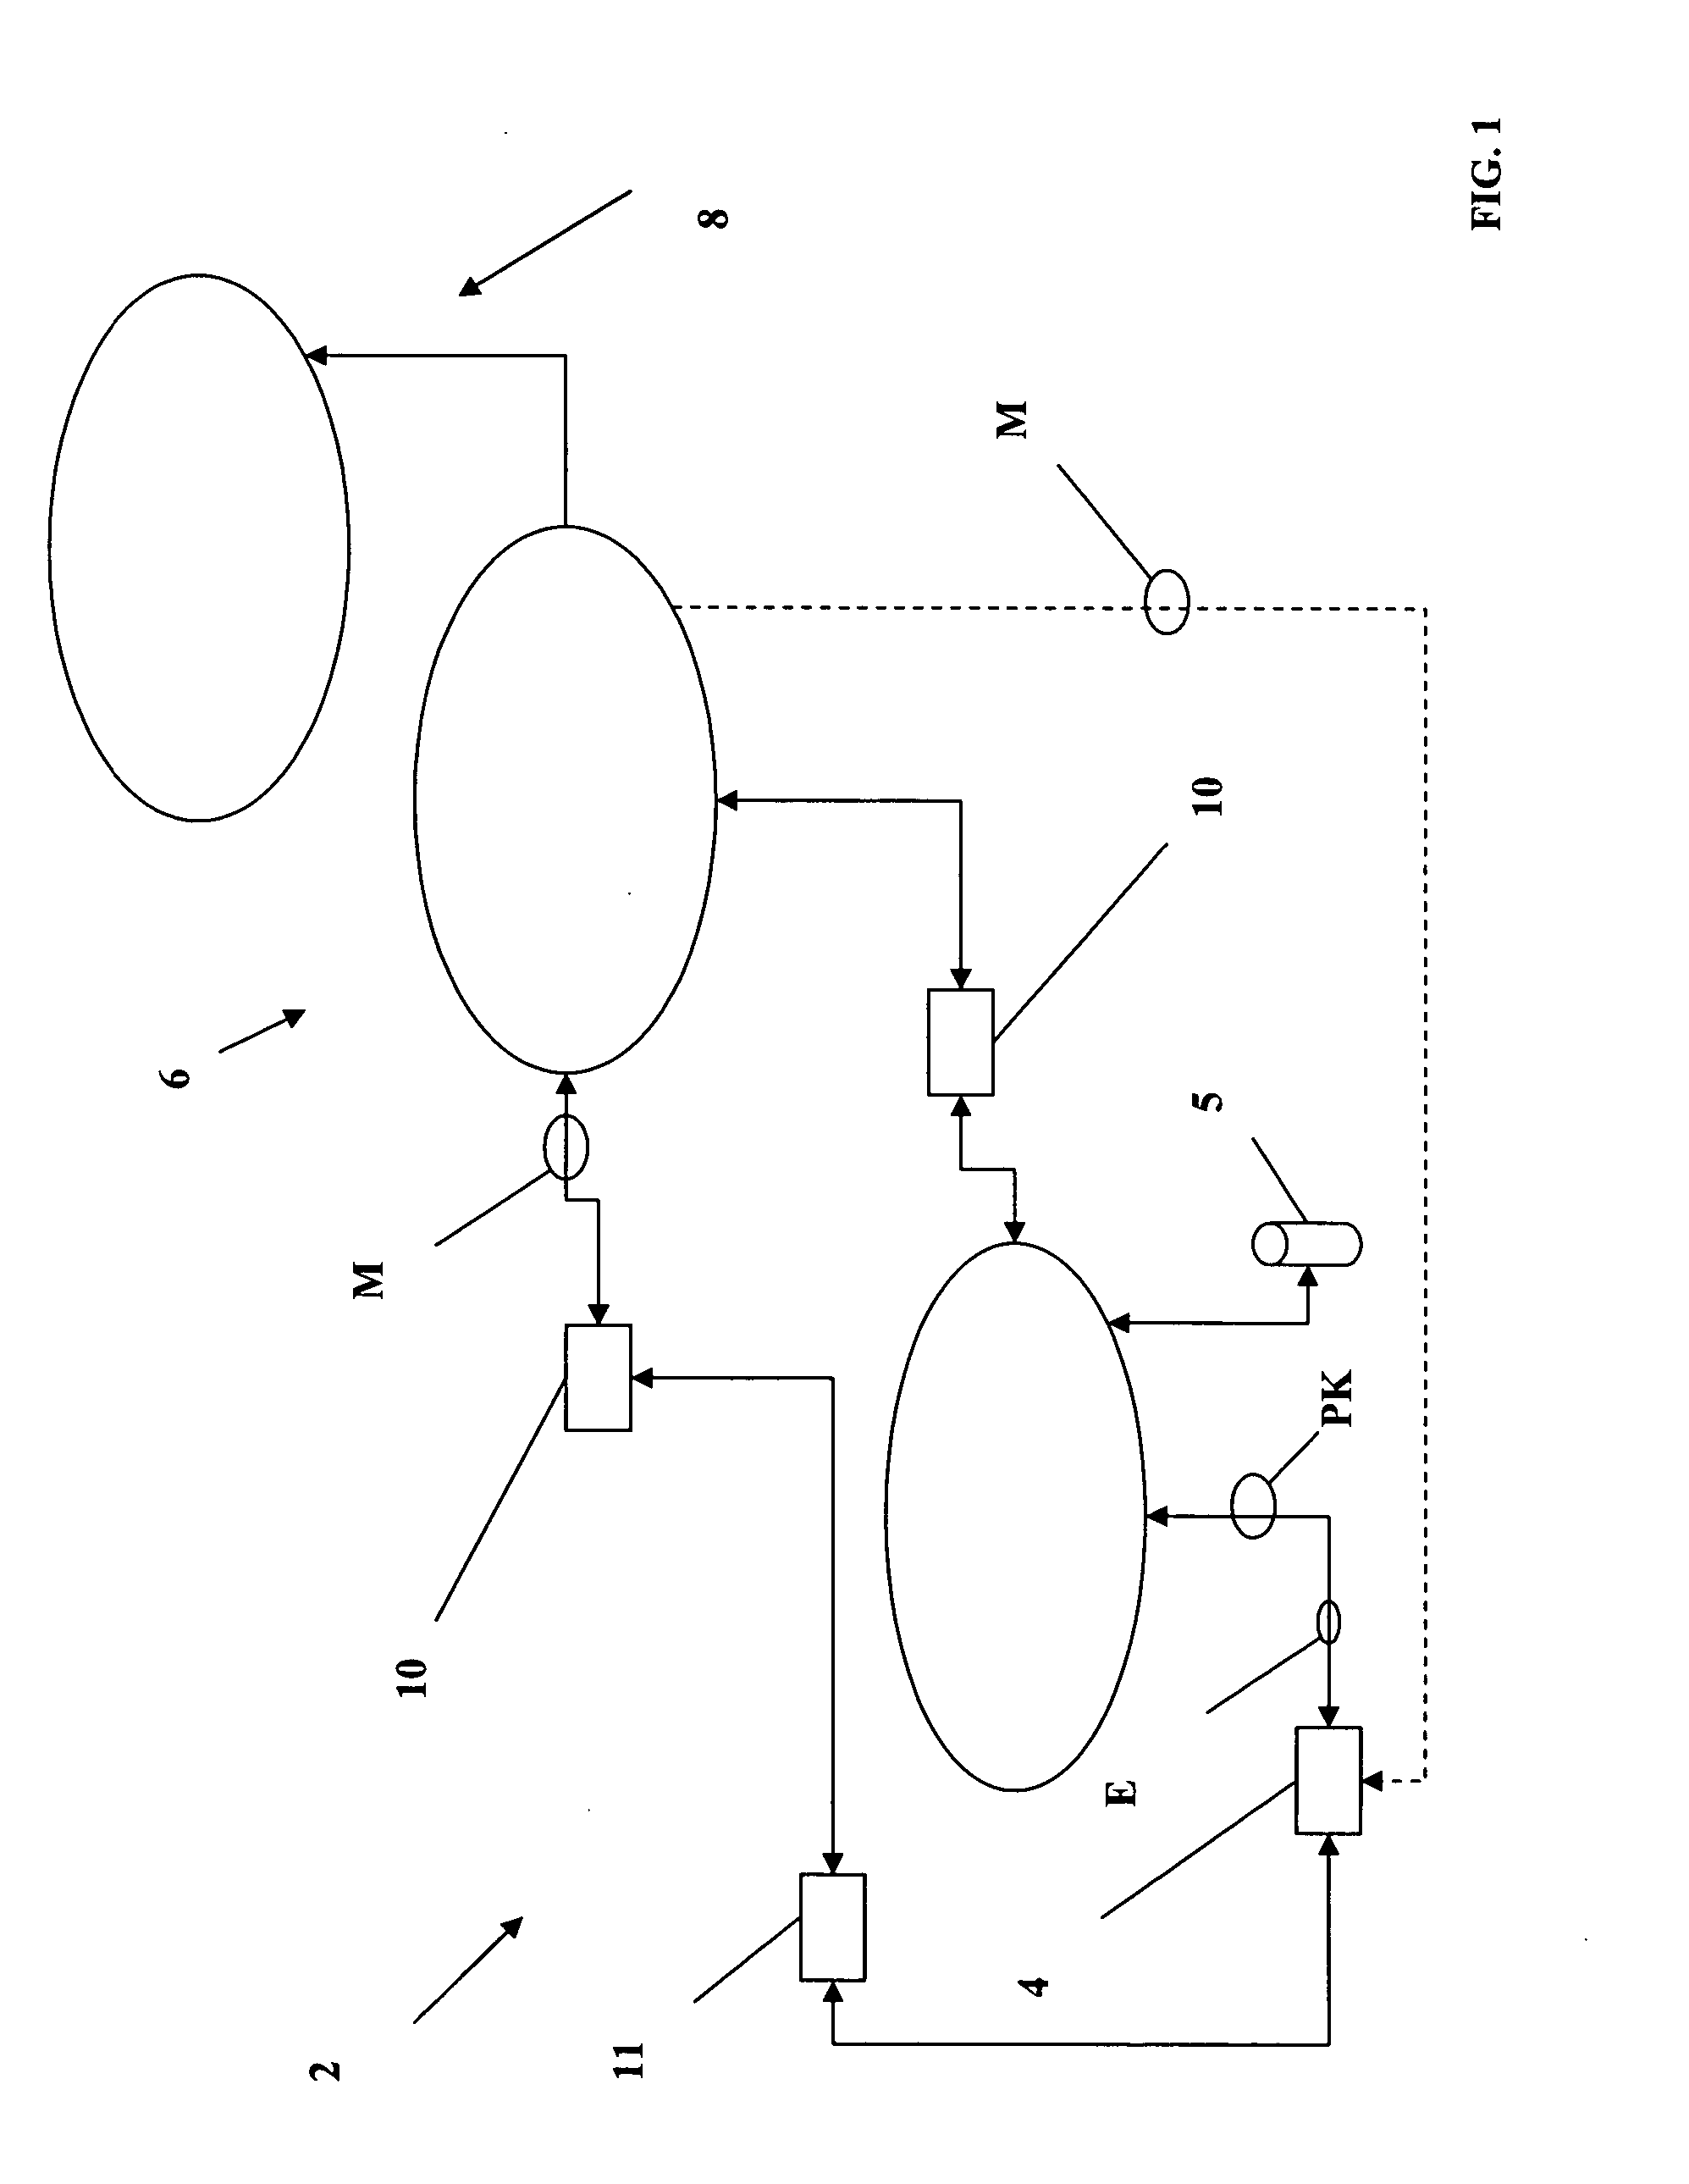 System and method of aggregating and consolidating security event data